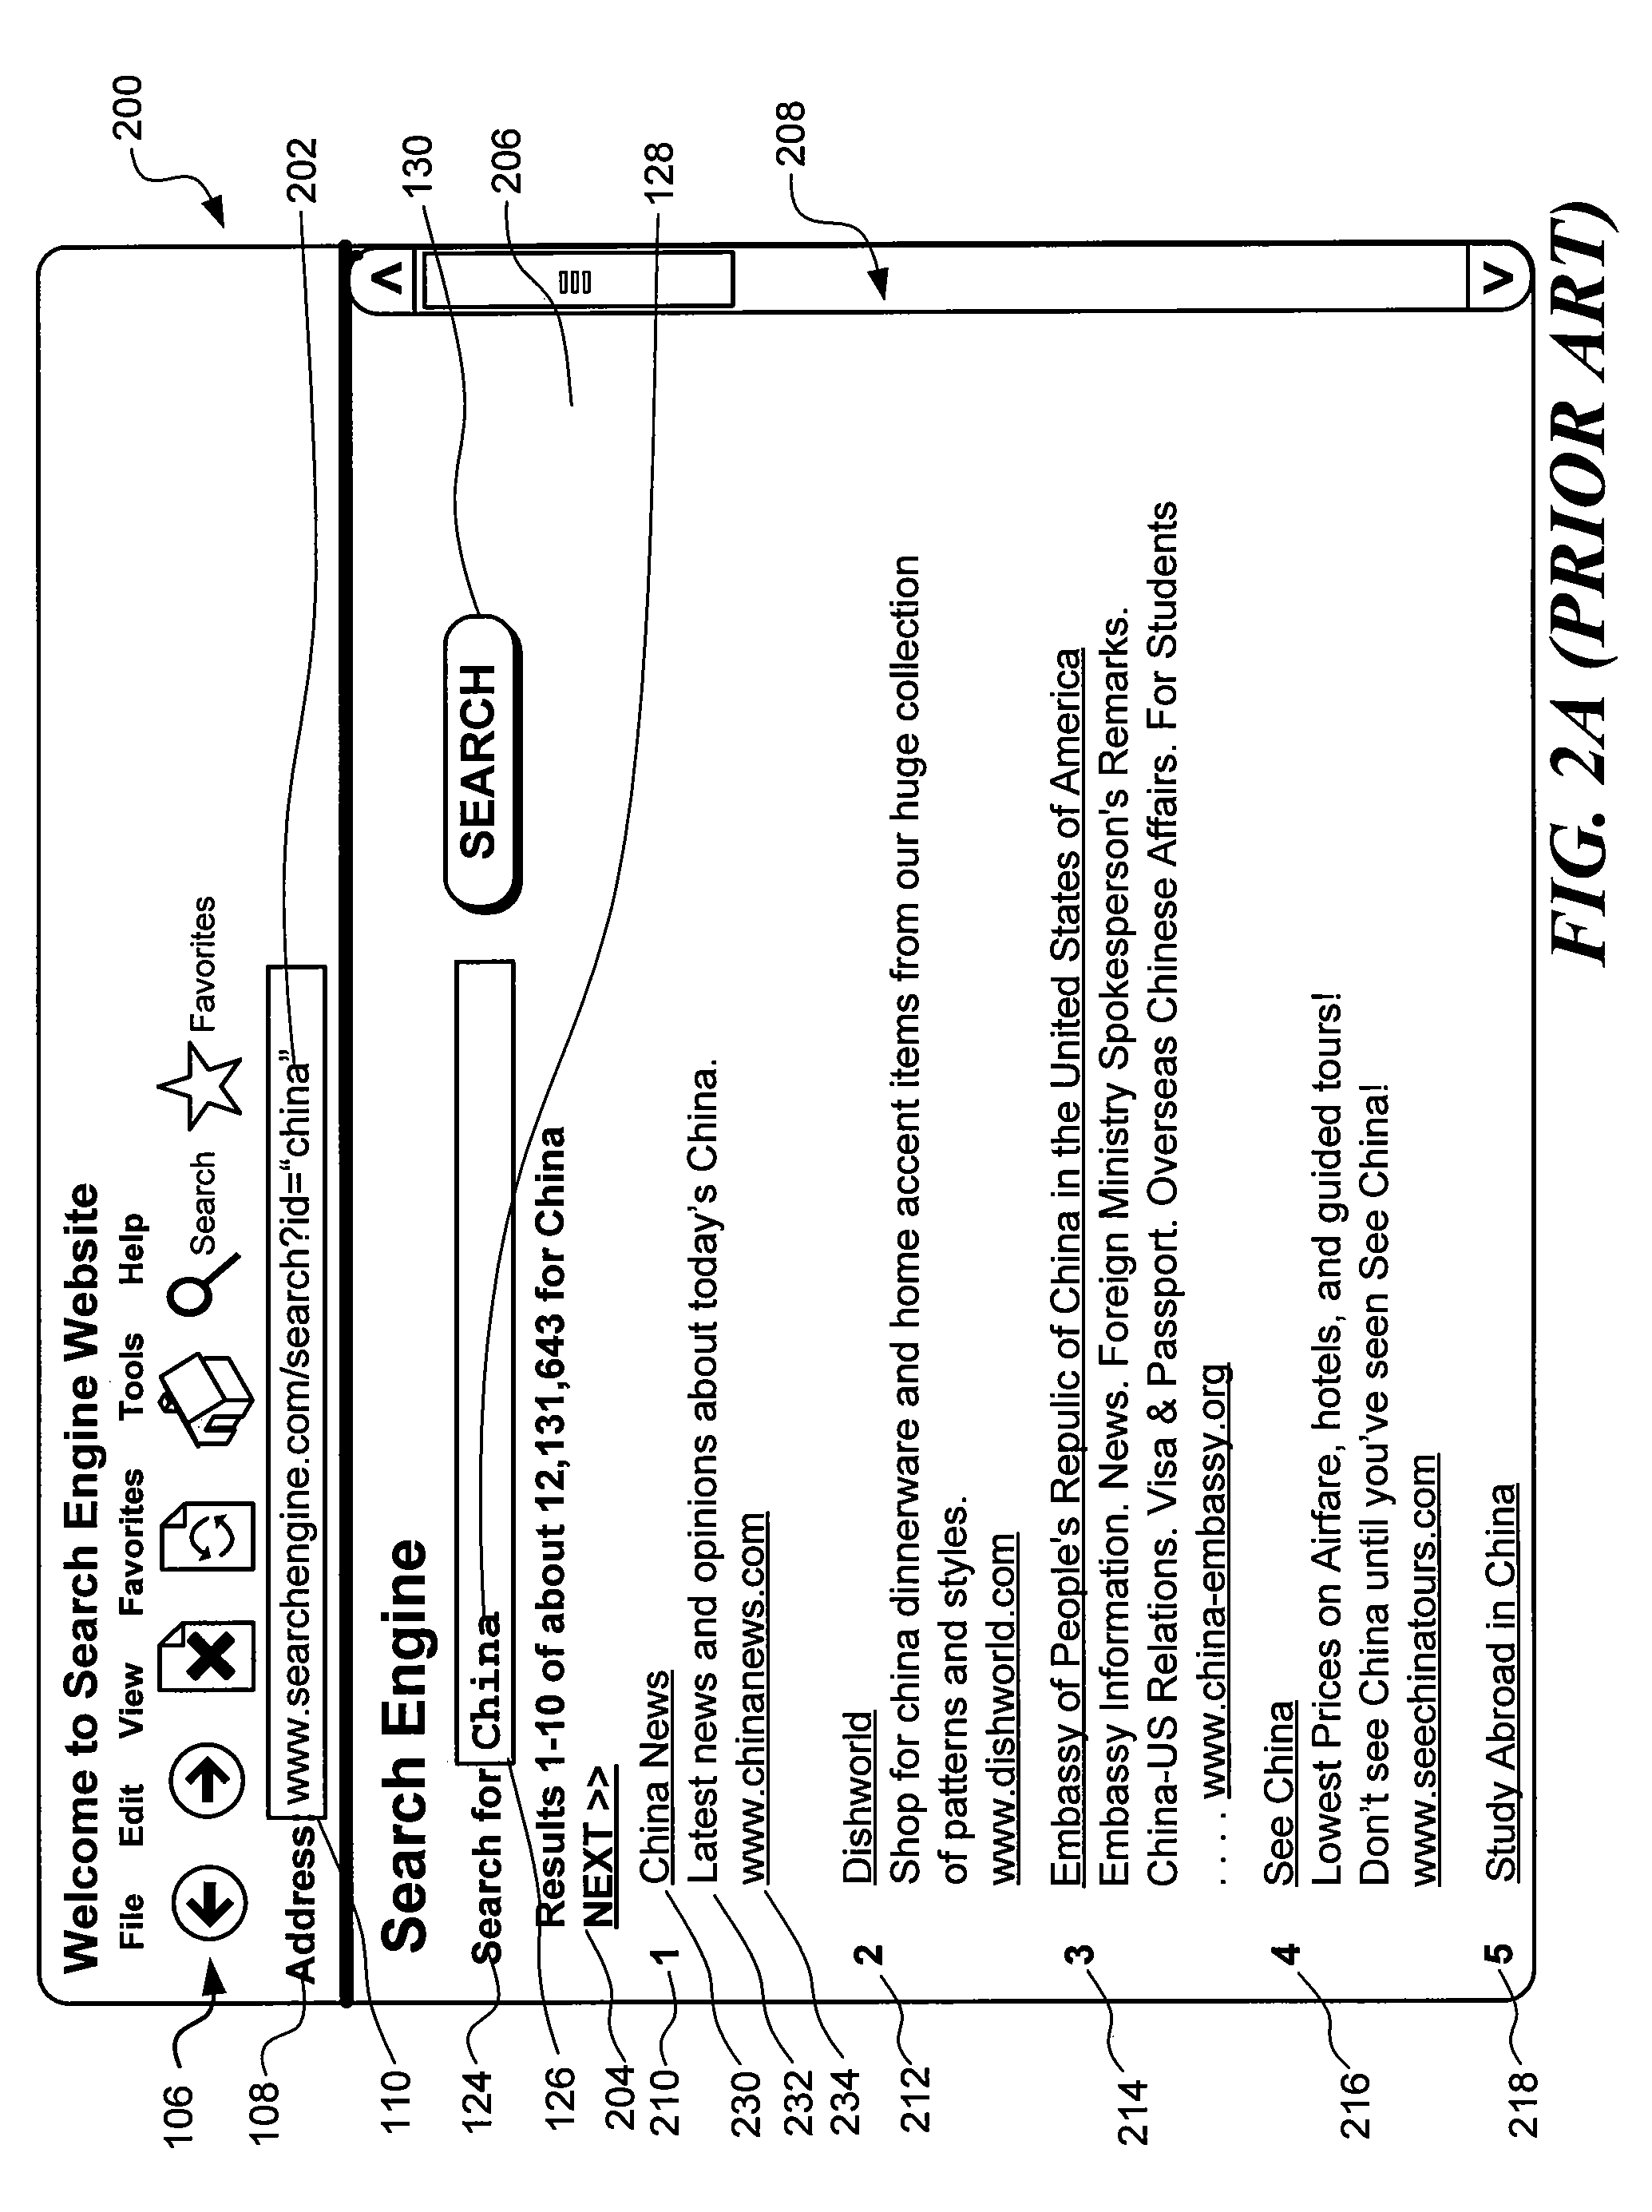 Method and system for adaptive categorial presentation of search results